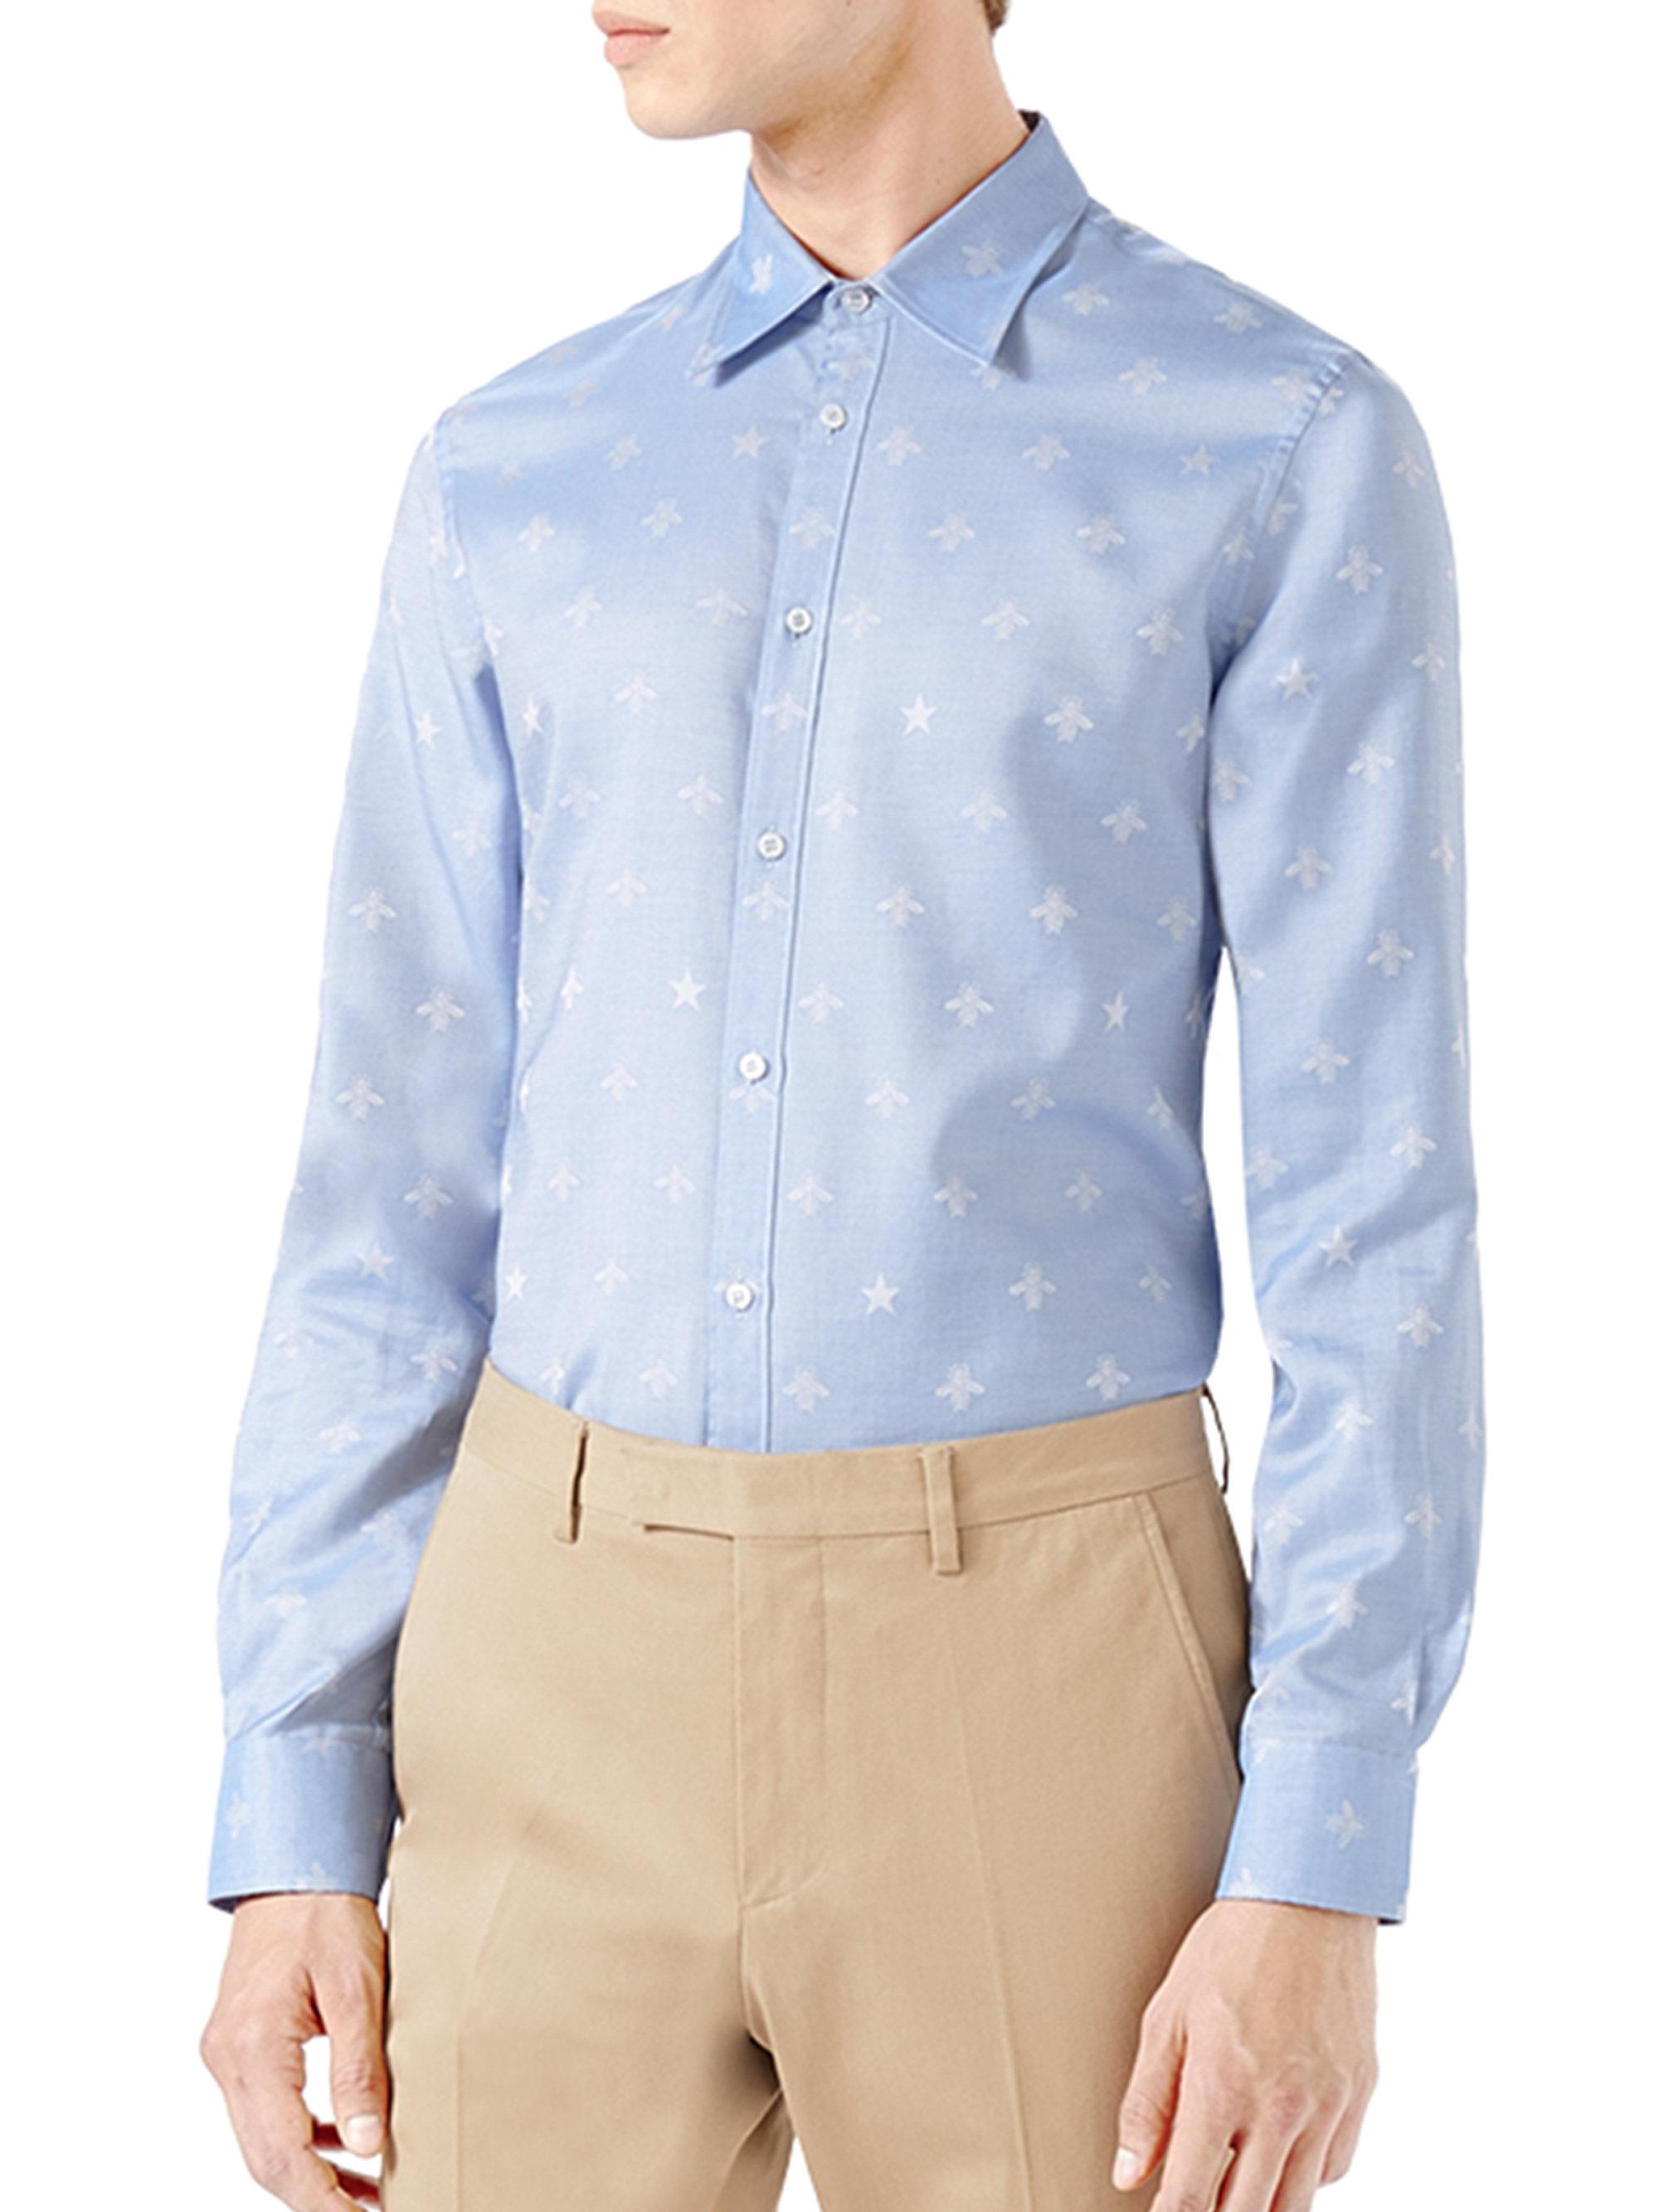 Gucci Bee Jacquard Oxford Duke Shirt in Blue for Men | Lyst